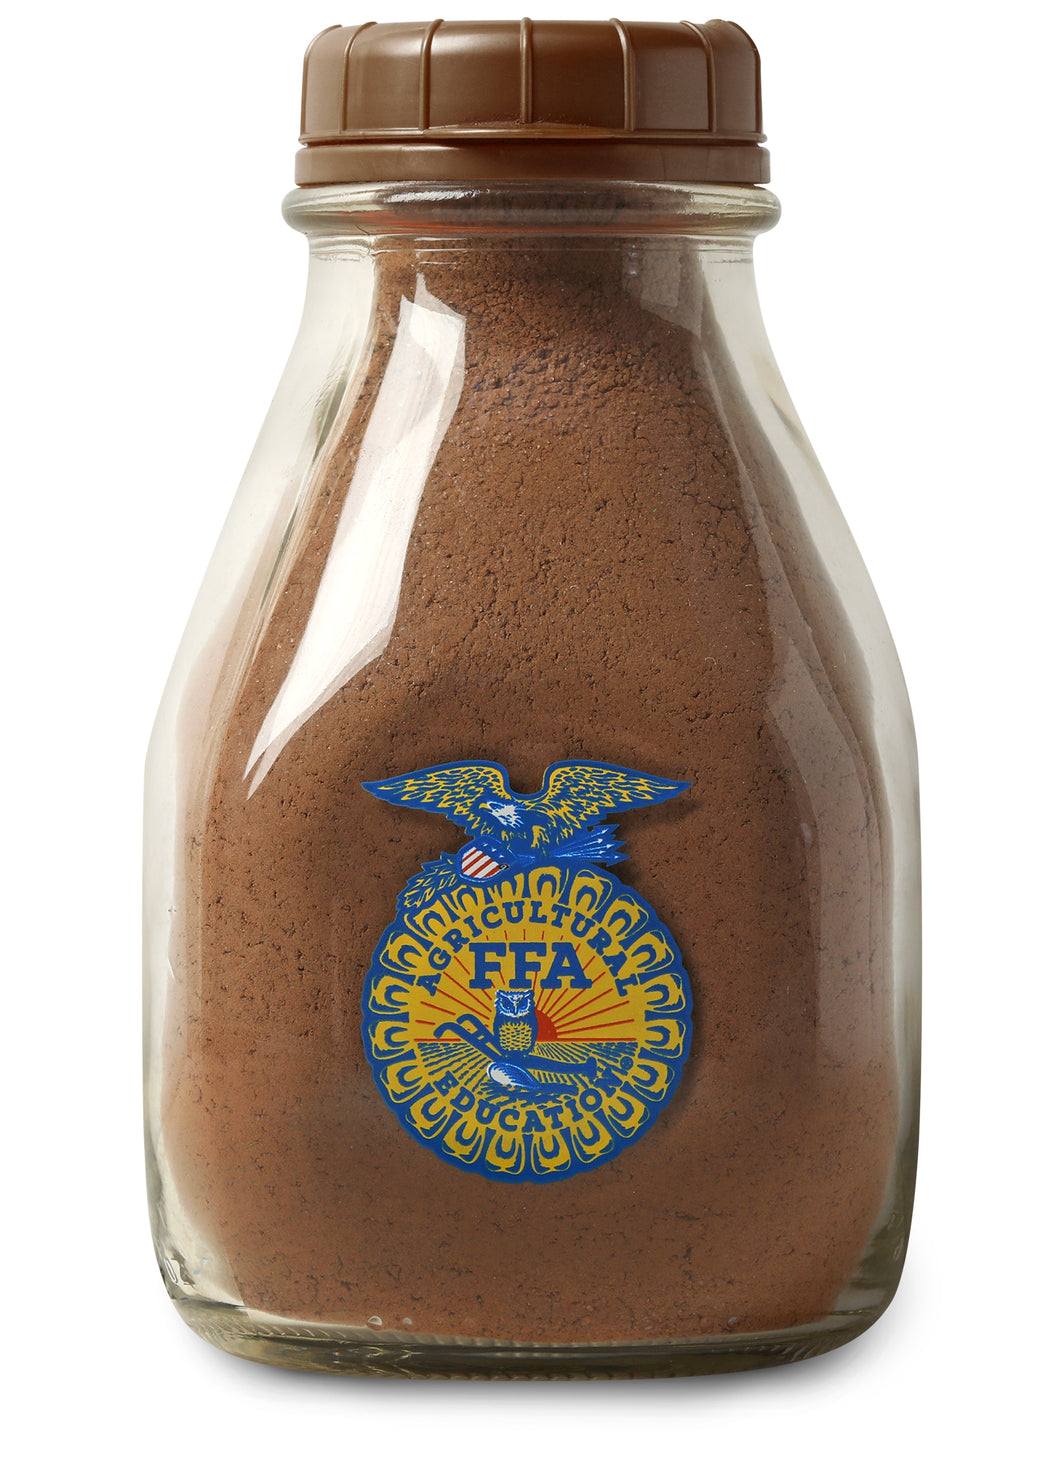 FFA Collectors Edition Bottle filled with Iced Mocha Coffee powder  *Contains MILK